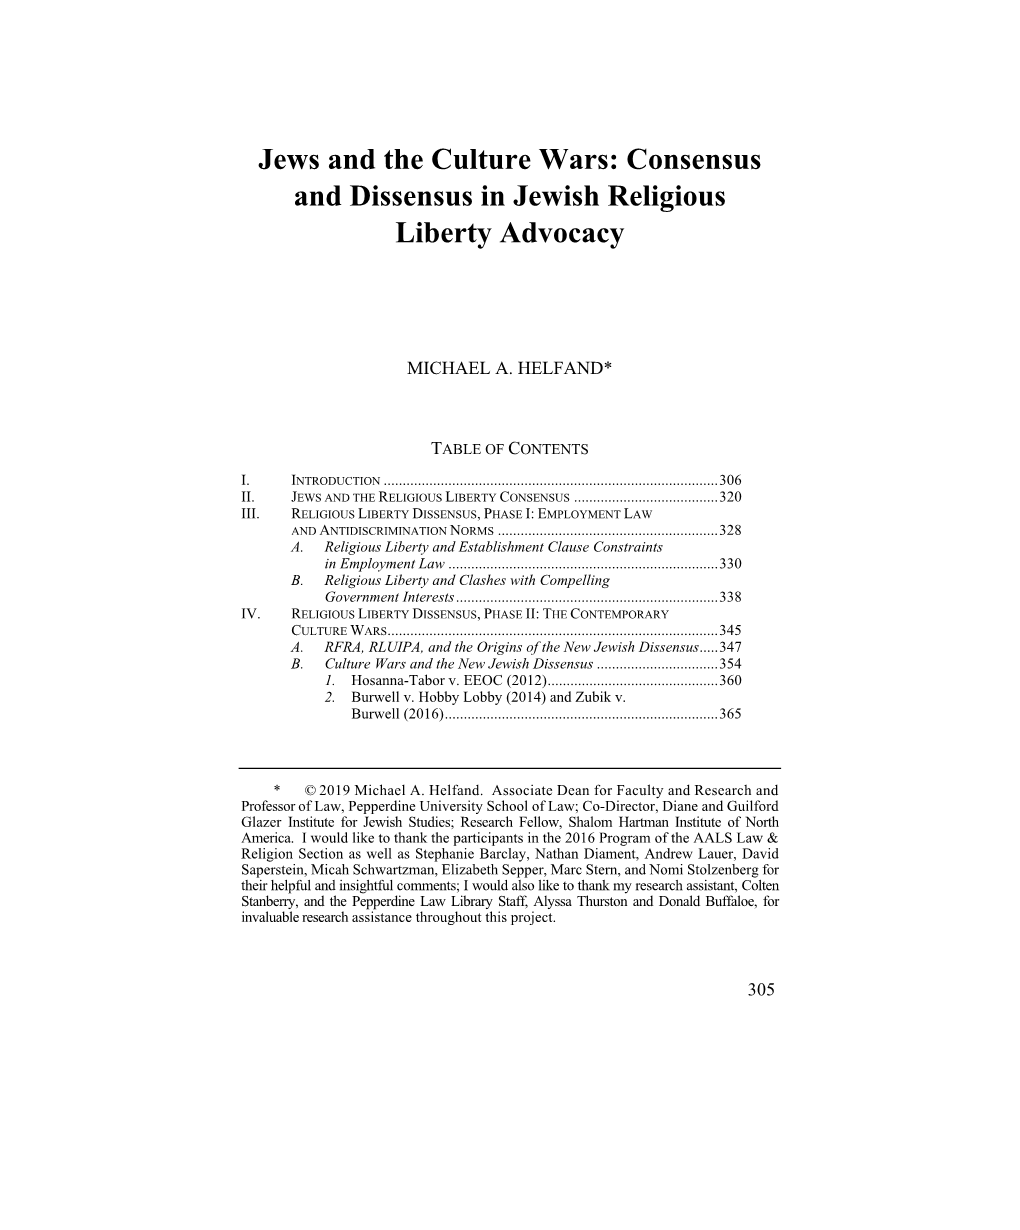 Jews and the Culture Wars: Consensus and Dissensus in Jewish Religious Liberty Advocacy